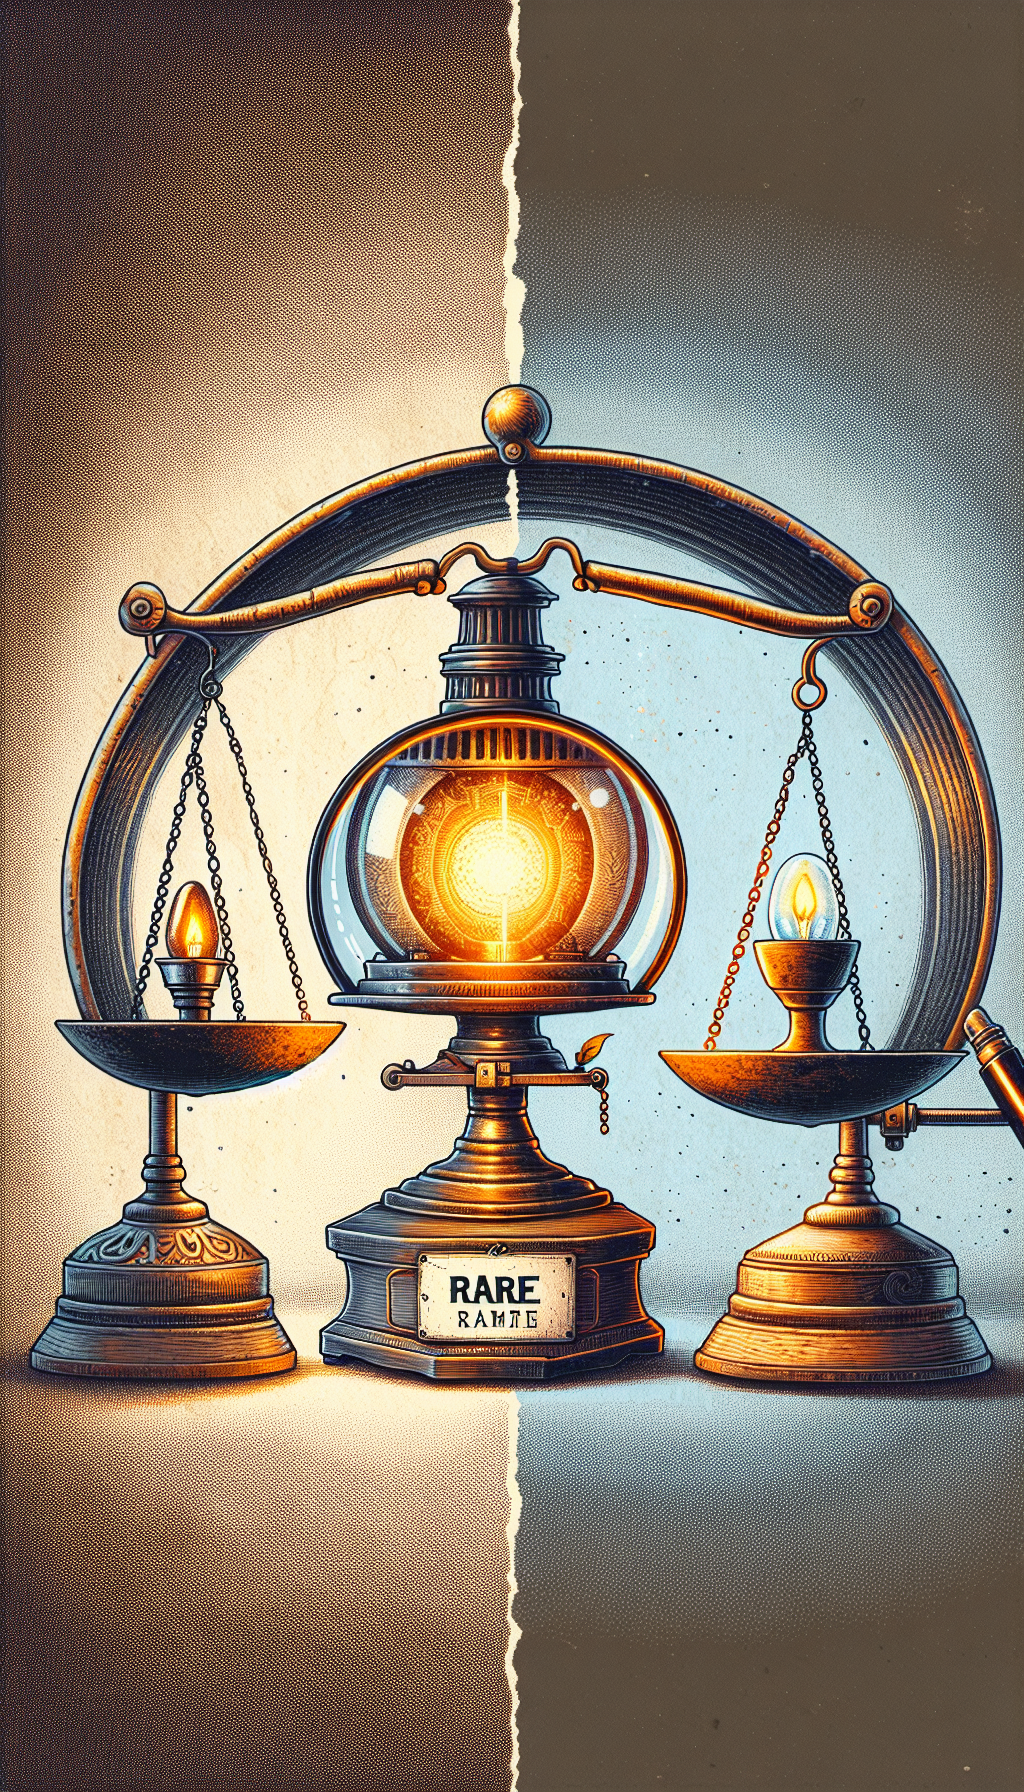 An illustrated split-screen showcasing an immaculate antique electric hurricane lamp on one side, with a radiant glow and a 'rare' label, contrasted against a tarnished, less rare lamp on the other, beneath a magnifying glass highlighting flaws. A value scale balances them, tilting towards the pristine lamp. Image format: 16:9.